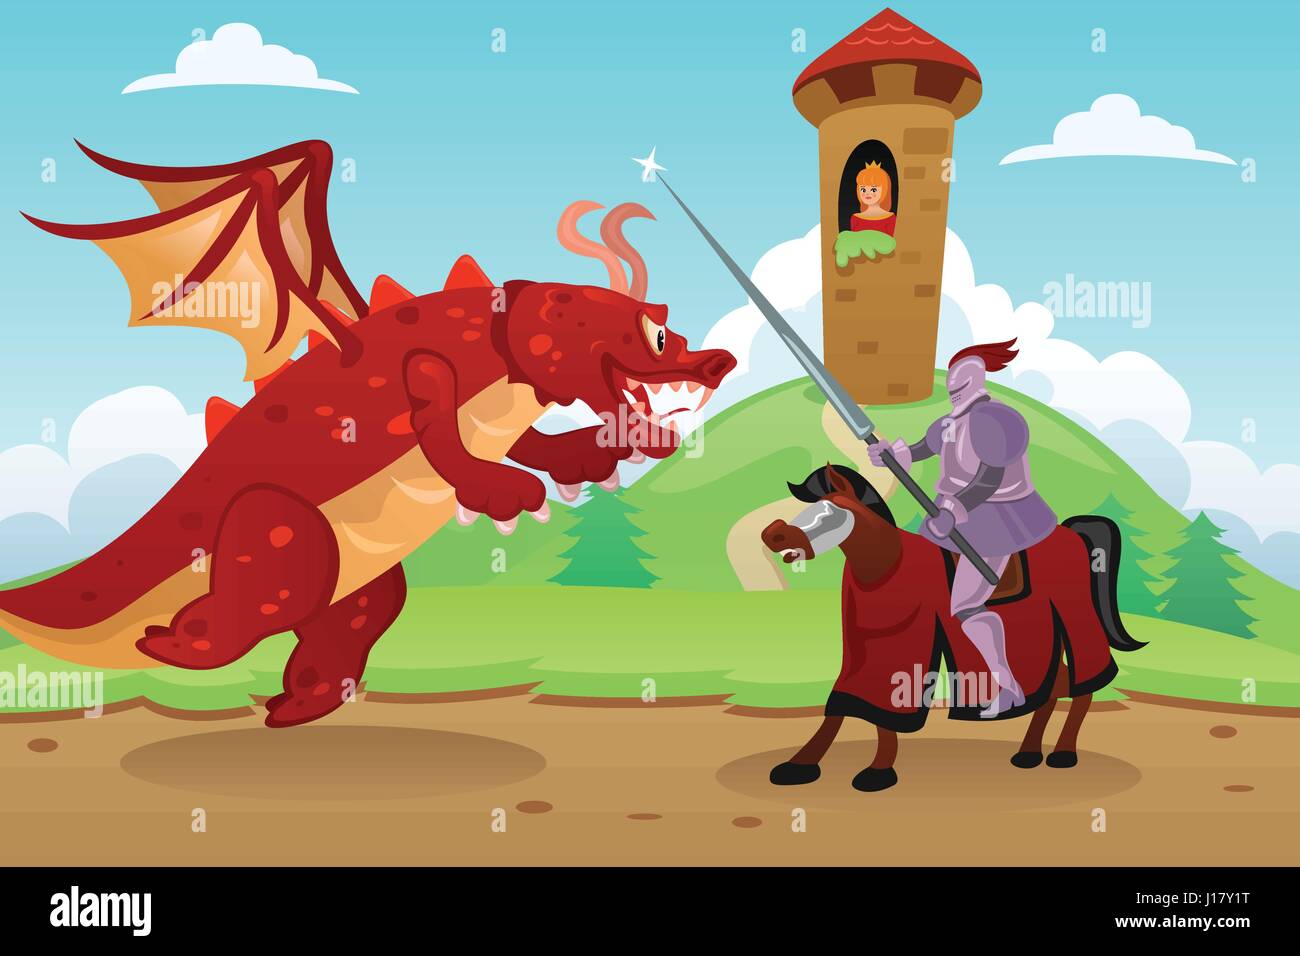 A vector illustration of knight fighting a dragon to save princess Stock Vector